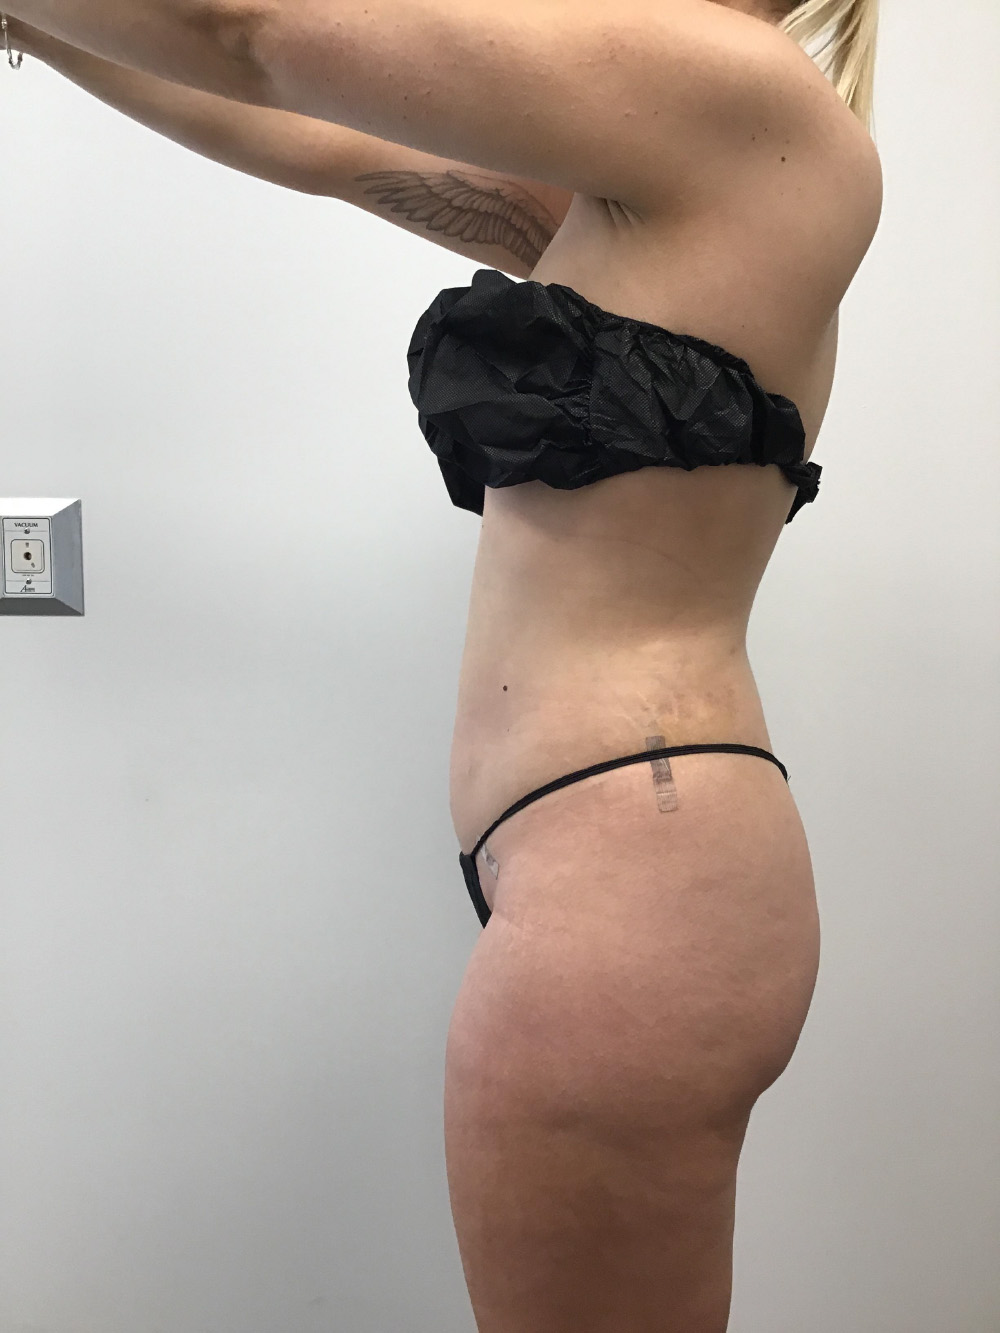 Liposuction vs Tummy Tuck: Which Is Better?